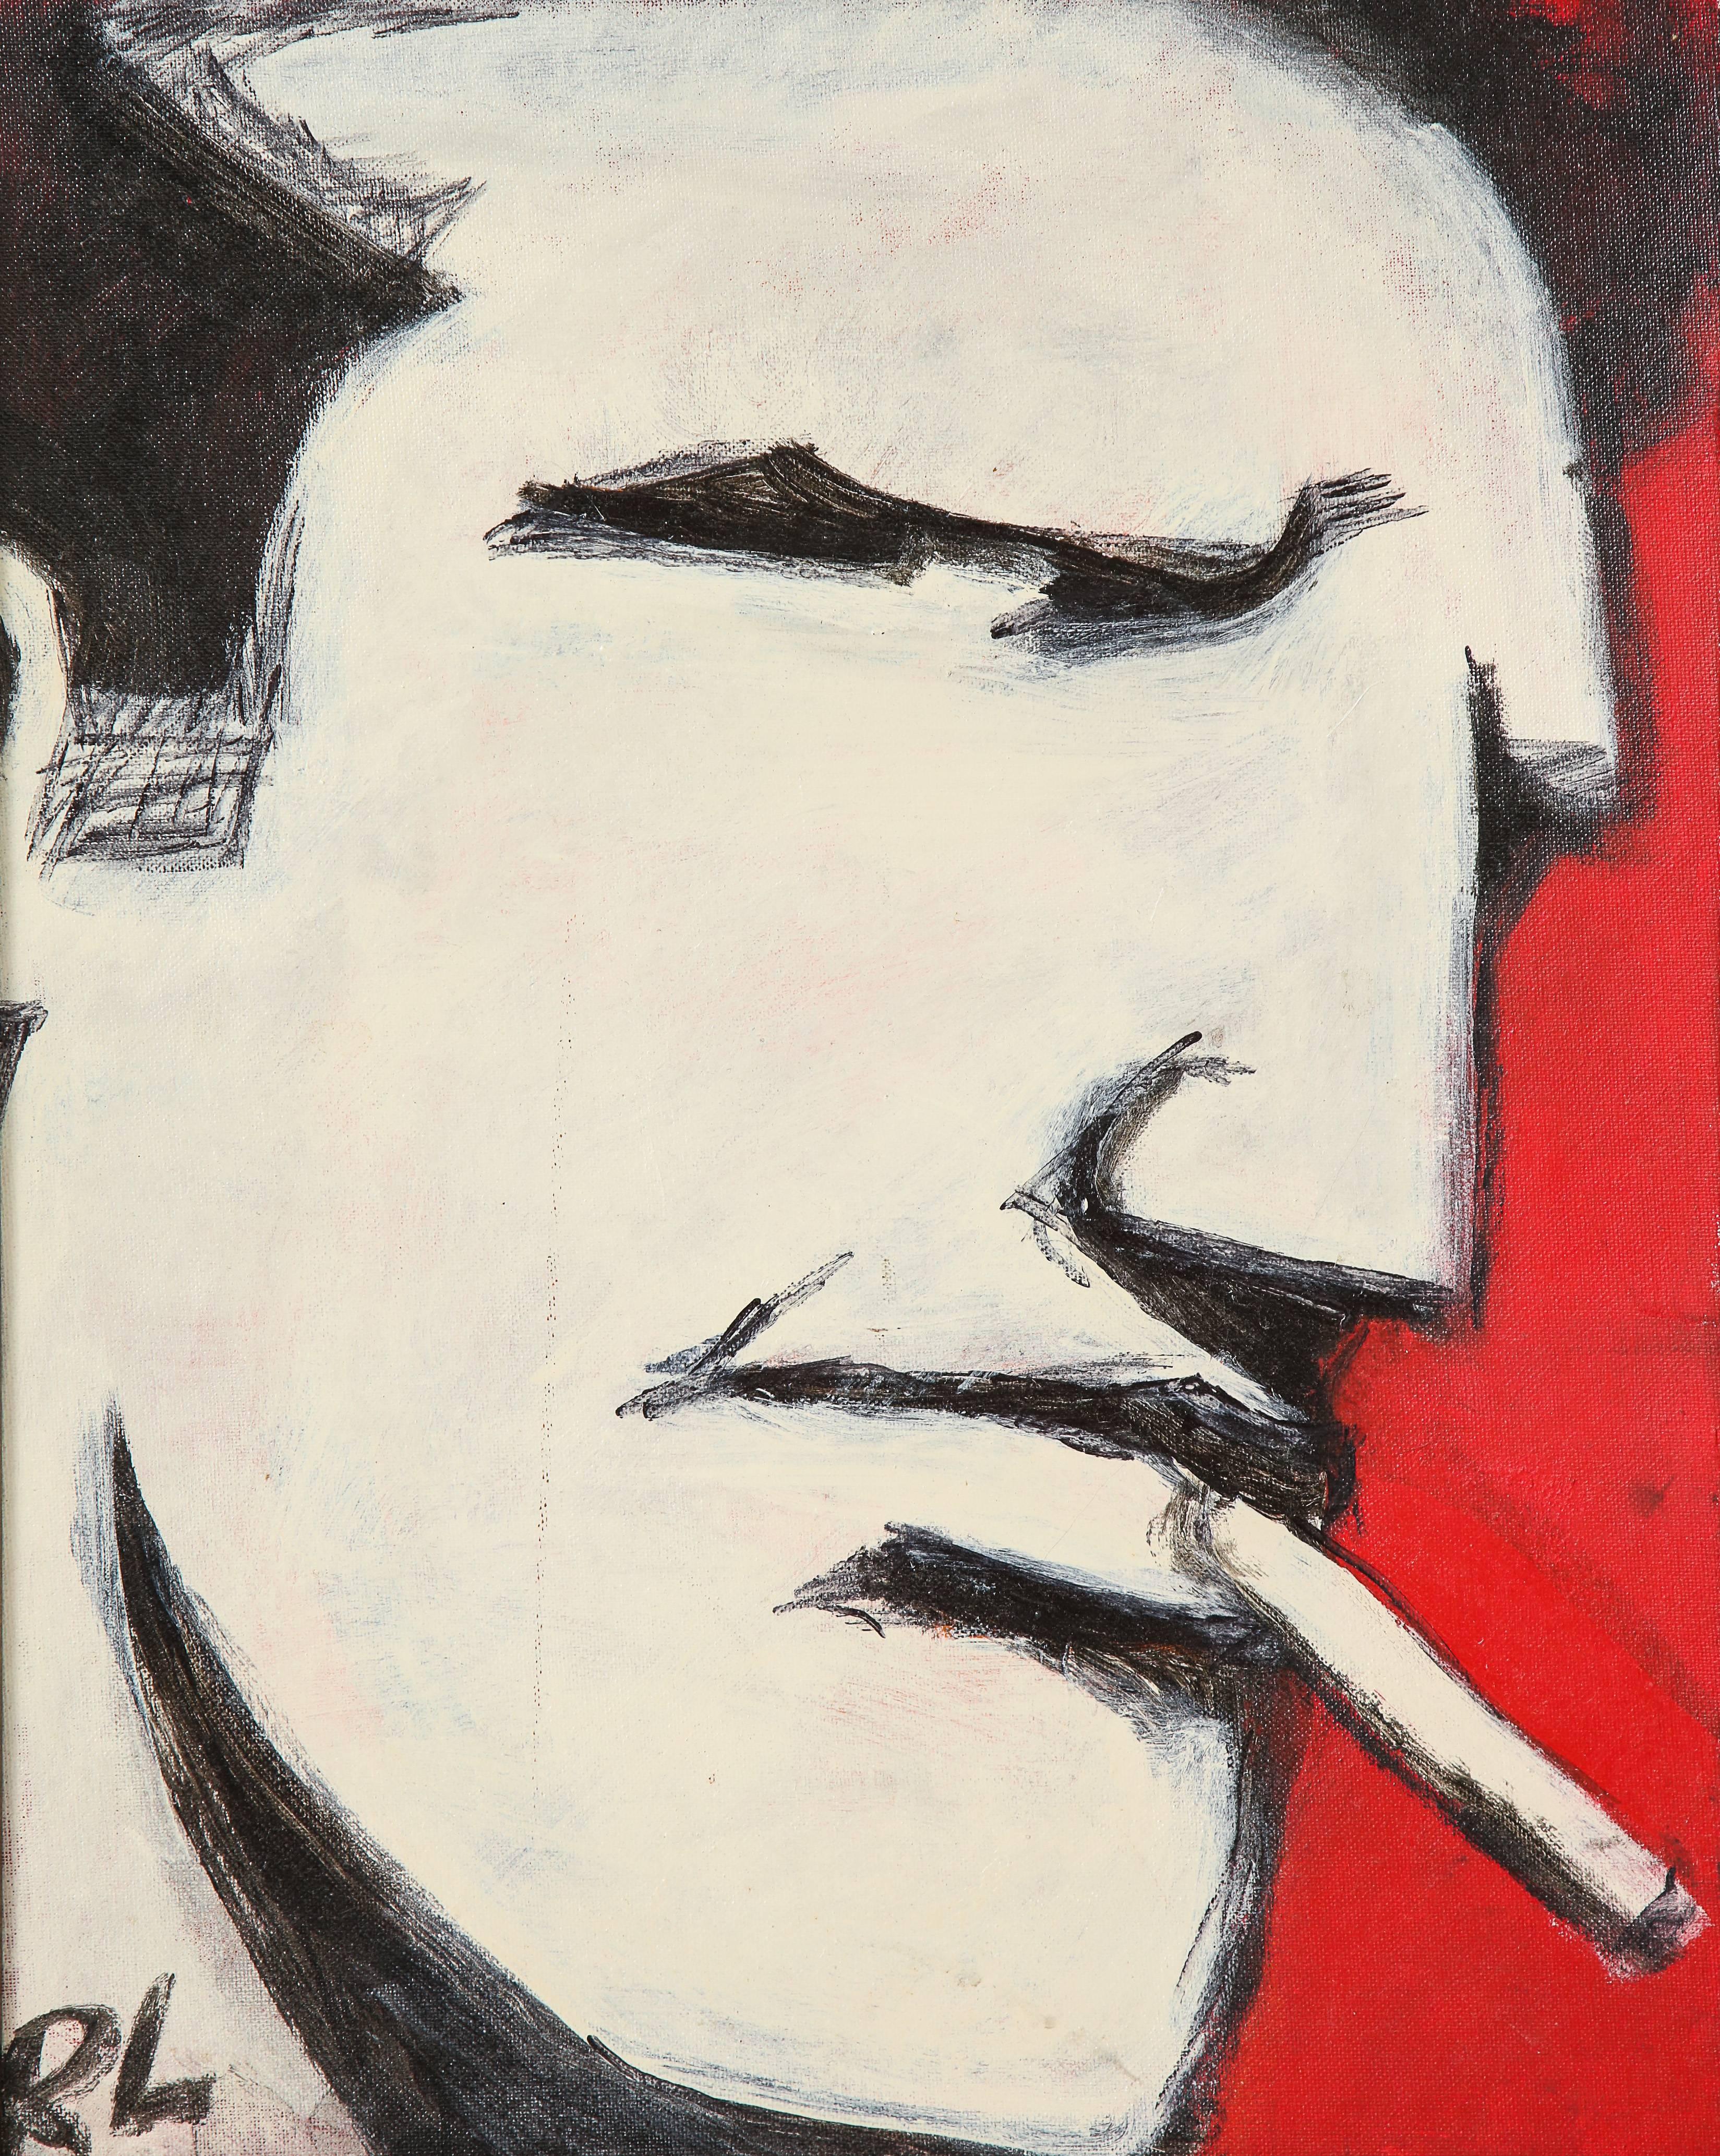 Robert Loughlin Billy beer, painting on canvas panel, white, black, red, signed. Robert Loughlin, 1949-2011. A right profile Brute portrait executed with enamel paint on a 16